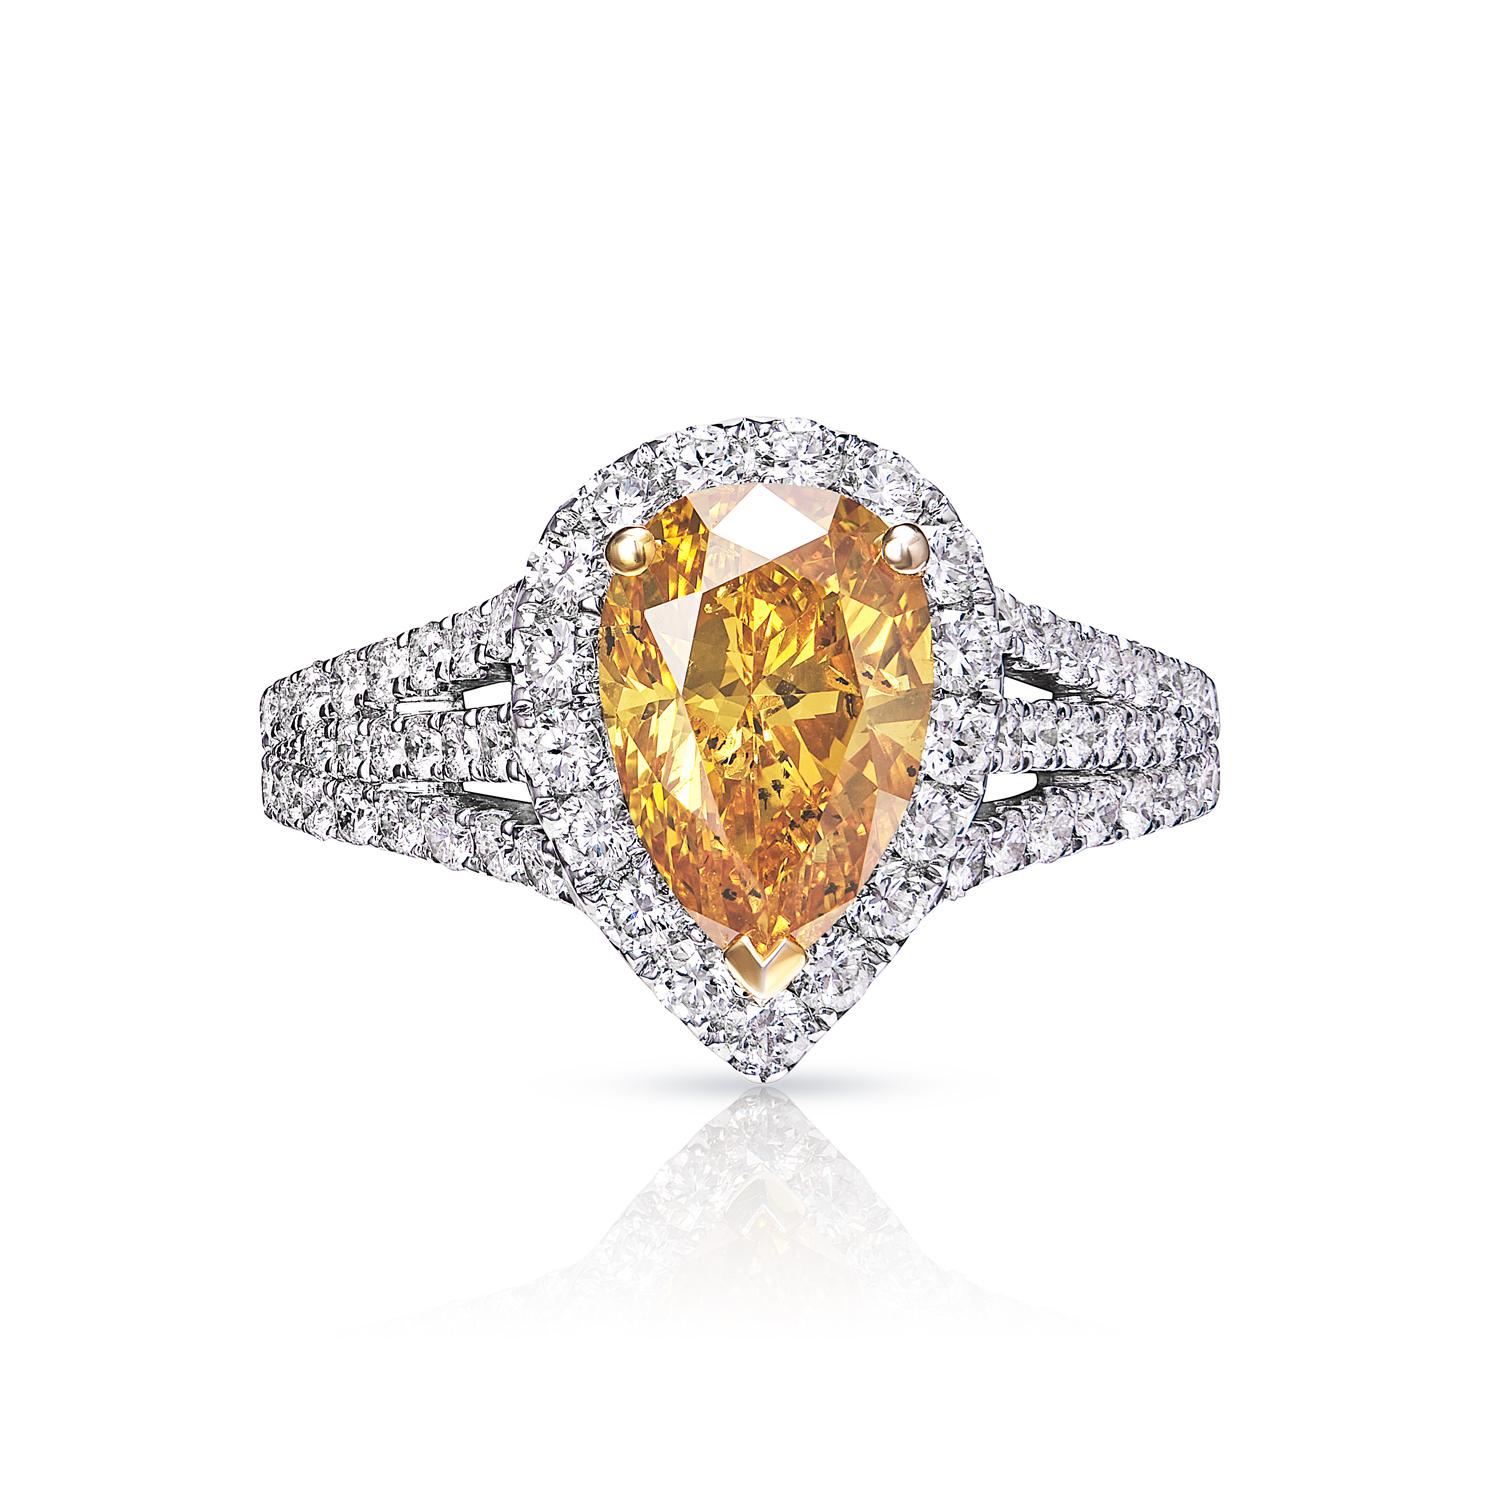 Our Pear Shape Diamond Engagement Ring features 3 carat diamonds and a halo element. This engagement ring is an excellent choice for those looking for a unique design for their engagement ring.

Center Earth Mined Diamond:
Carat Weight: 1.92